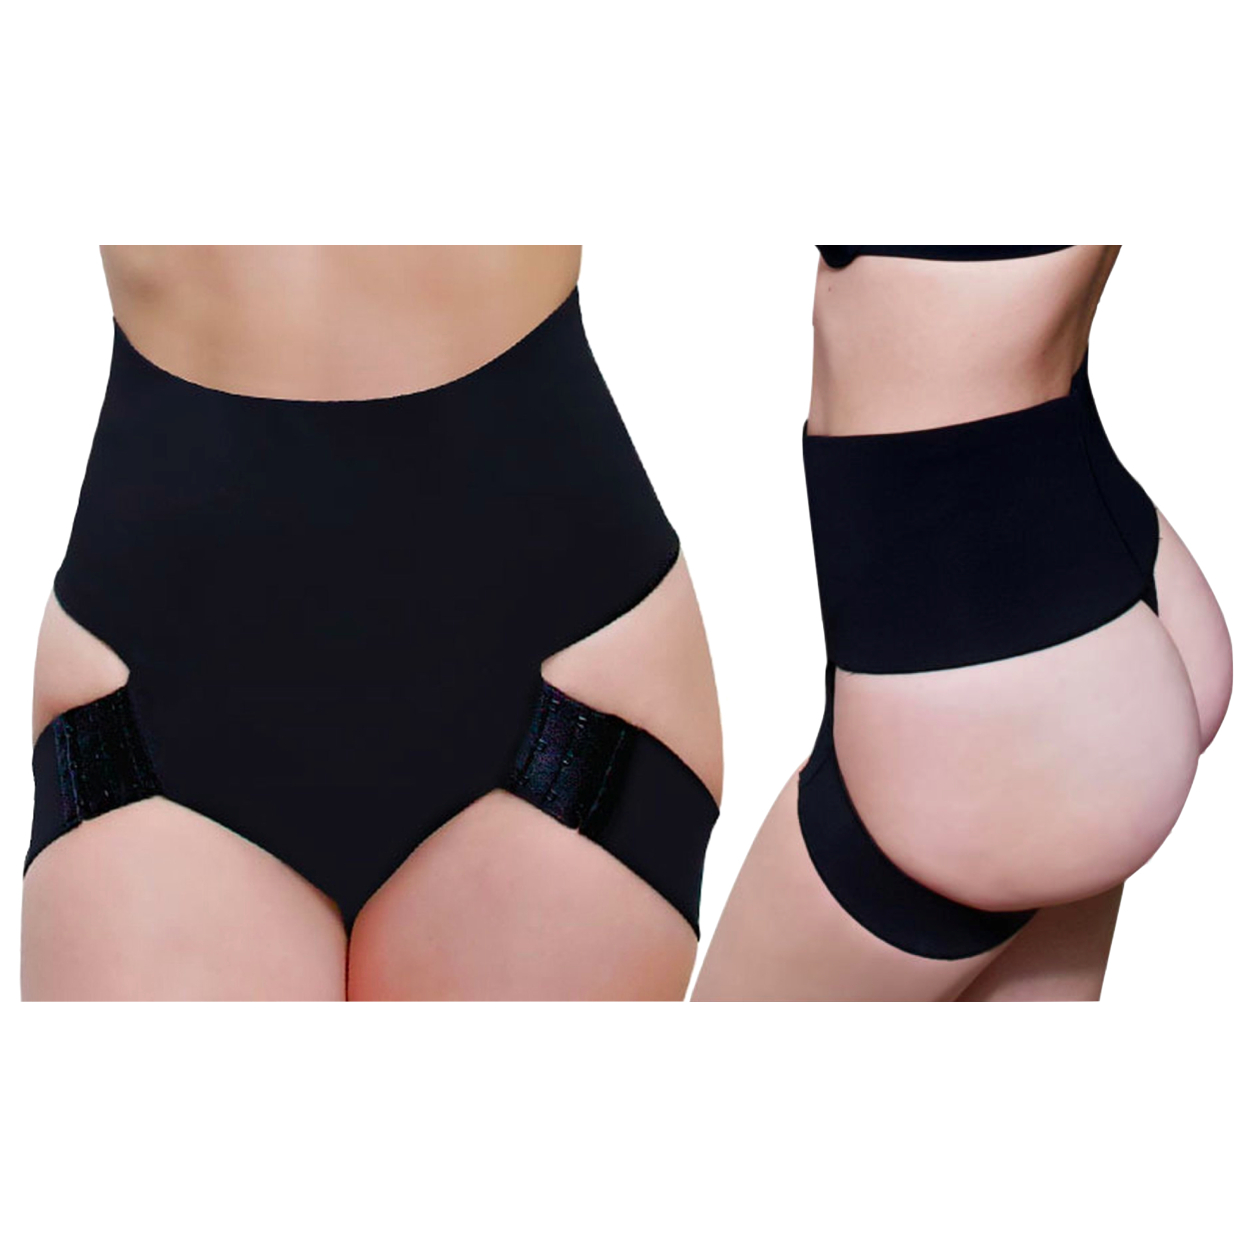 Adjustable Butt Booster Control Shaper In Regular And Plus Sizes - Black, 3X